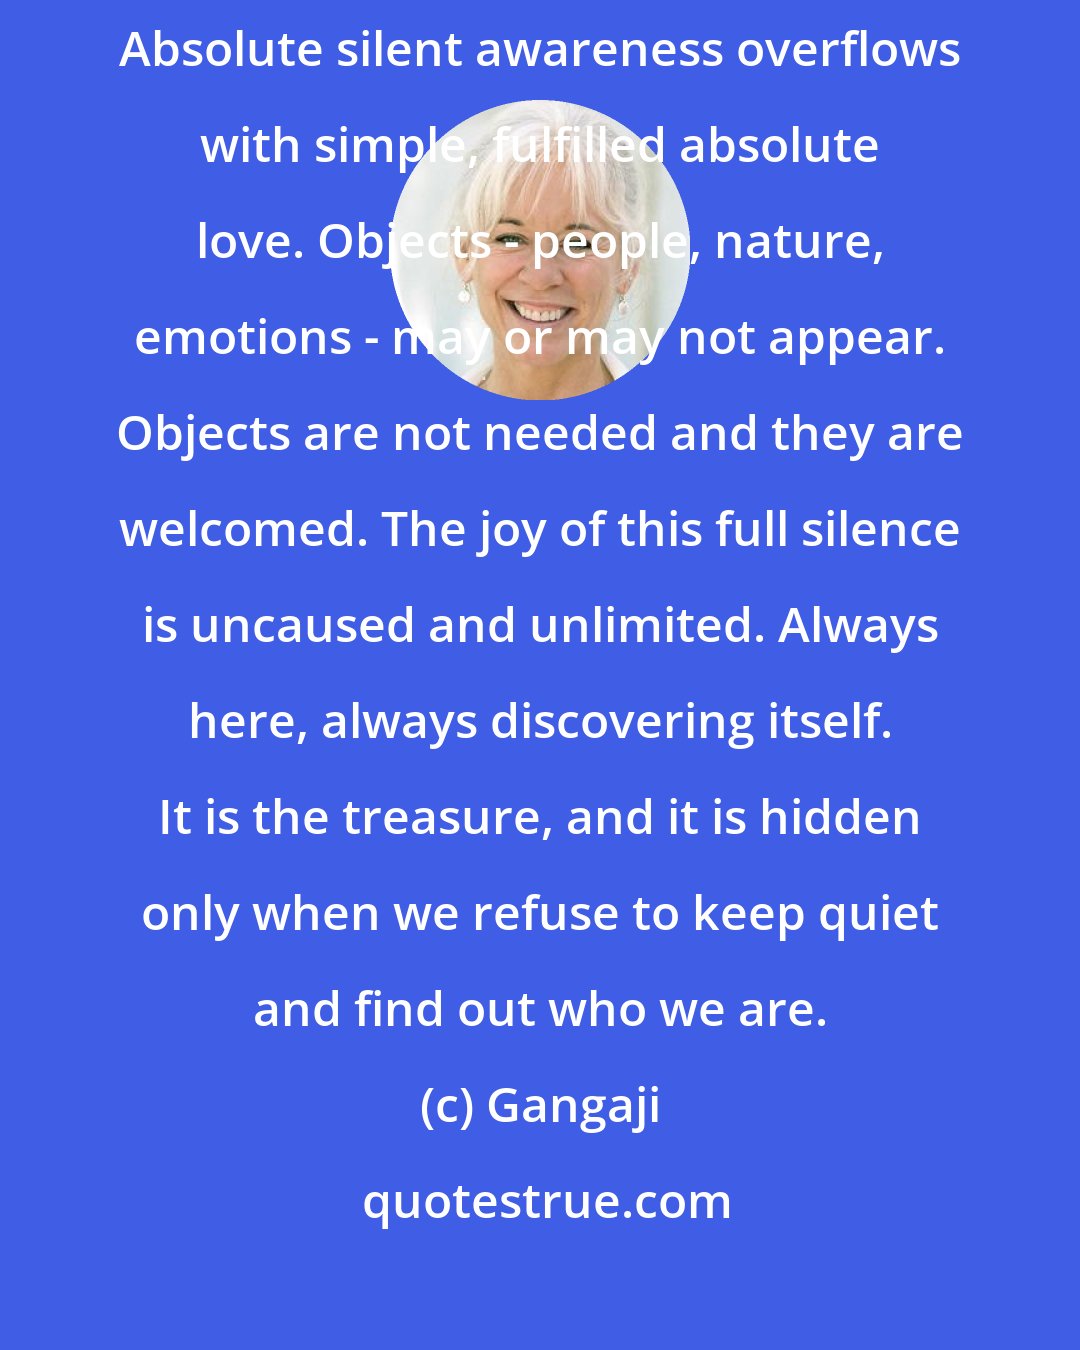 Gangaji: True, absolute silence and true, absolute love are not different. Absolute silent awareness overflows with simple, fulfilled absolute love. Objects - people, nature, emotions - may or may not appear. Objects are not needed and they are welcomed. The joy of this full silence is uncaused and unlimited. Always here, always discovering itself. It is the treasure, and it is hidden only when we refuse to keep quiet and find out who we are.